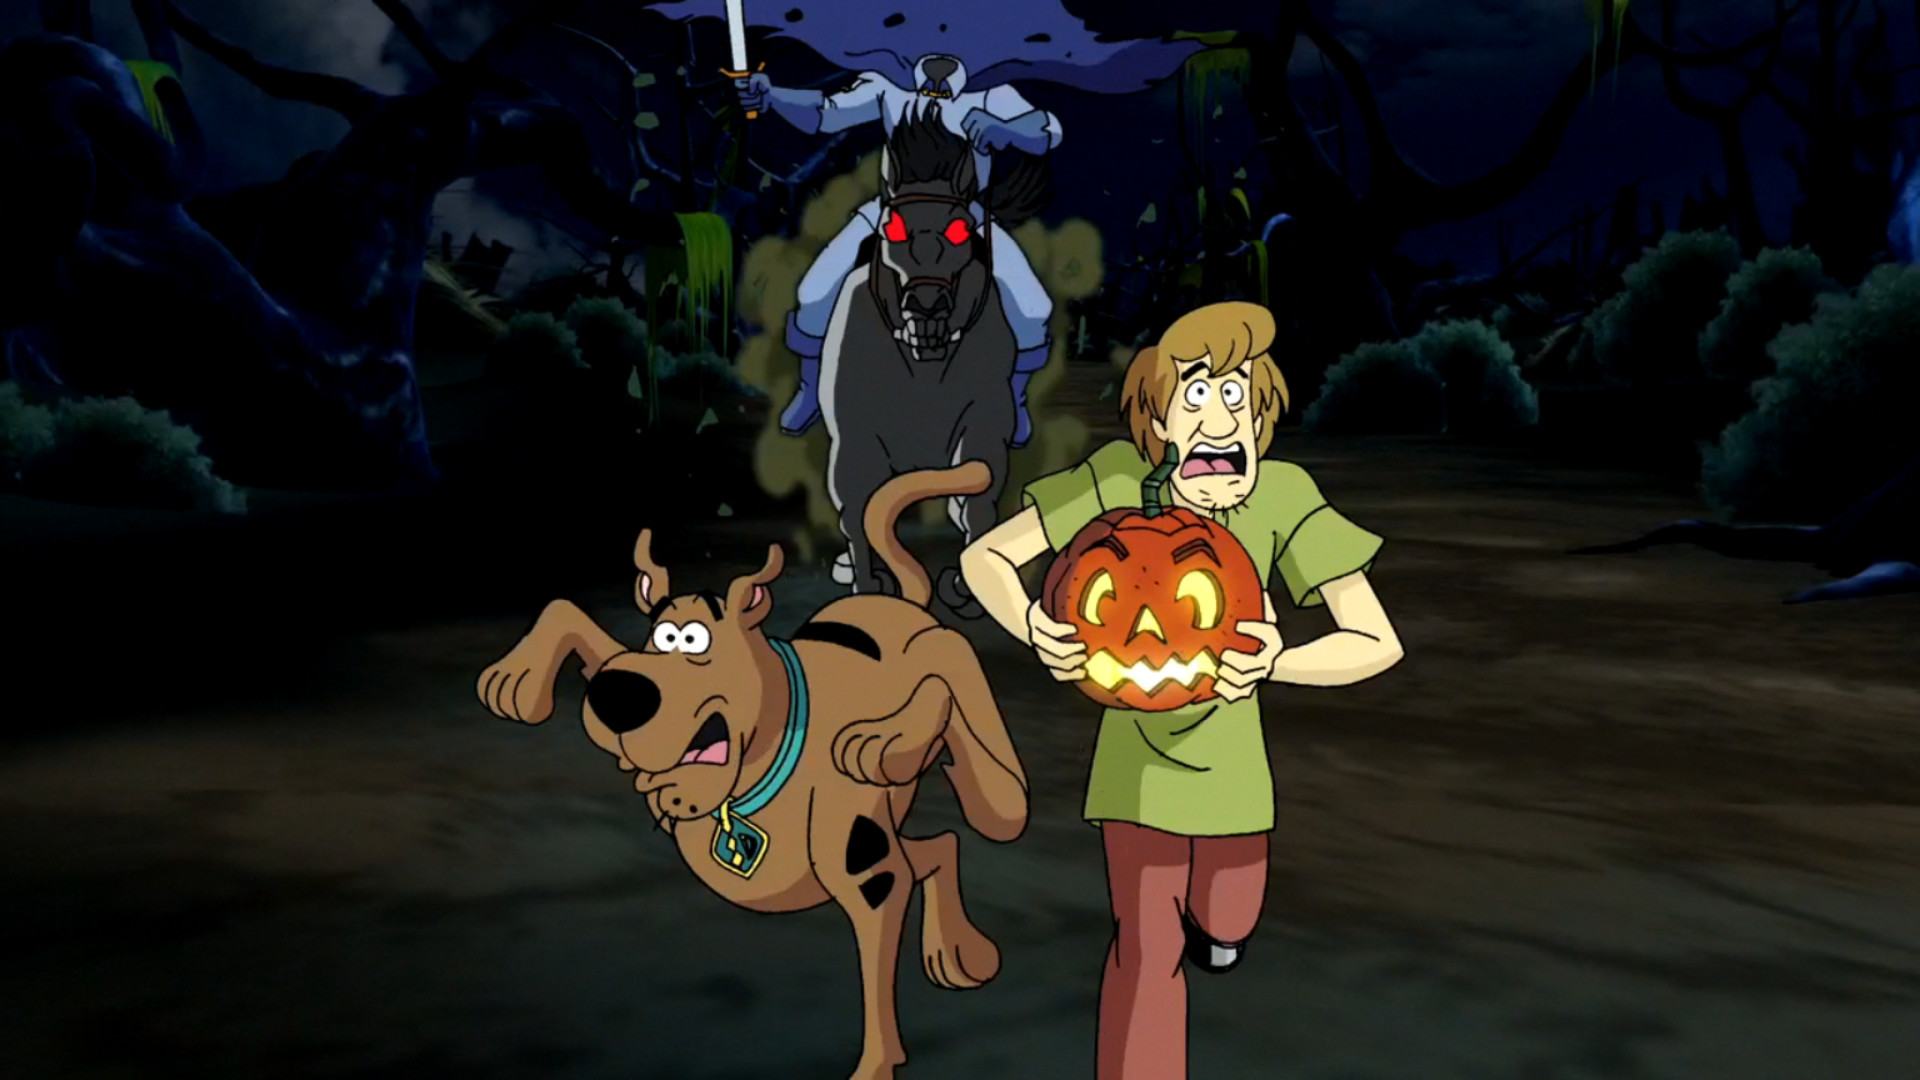 1920x1080 Scooby Doo Camp Scare Wallpaper For PC